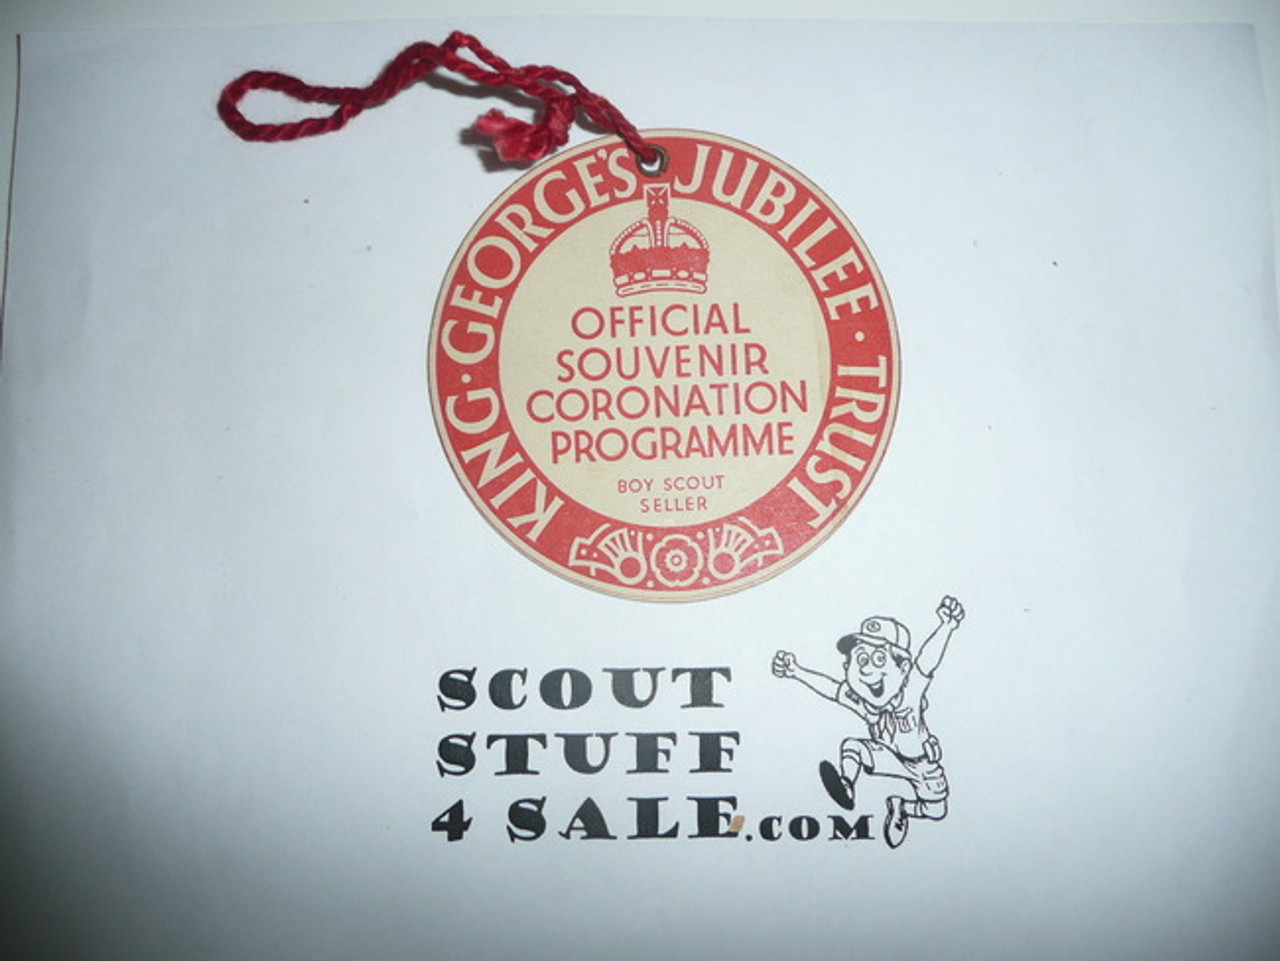 Hanging Tag From King Georges Jubilee/ Official Souvenier Coronation Program Boy Scout Seller